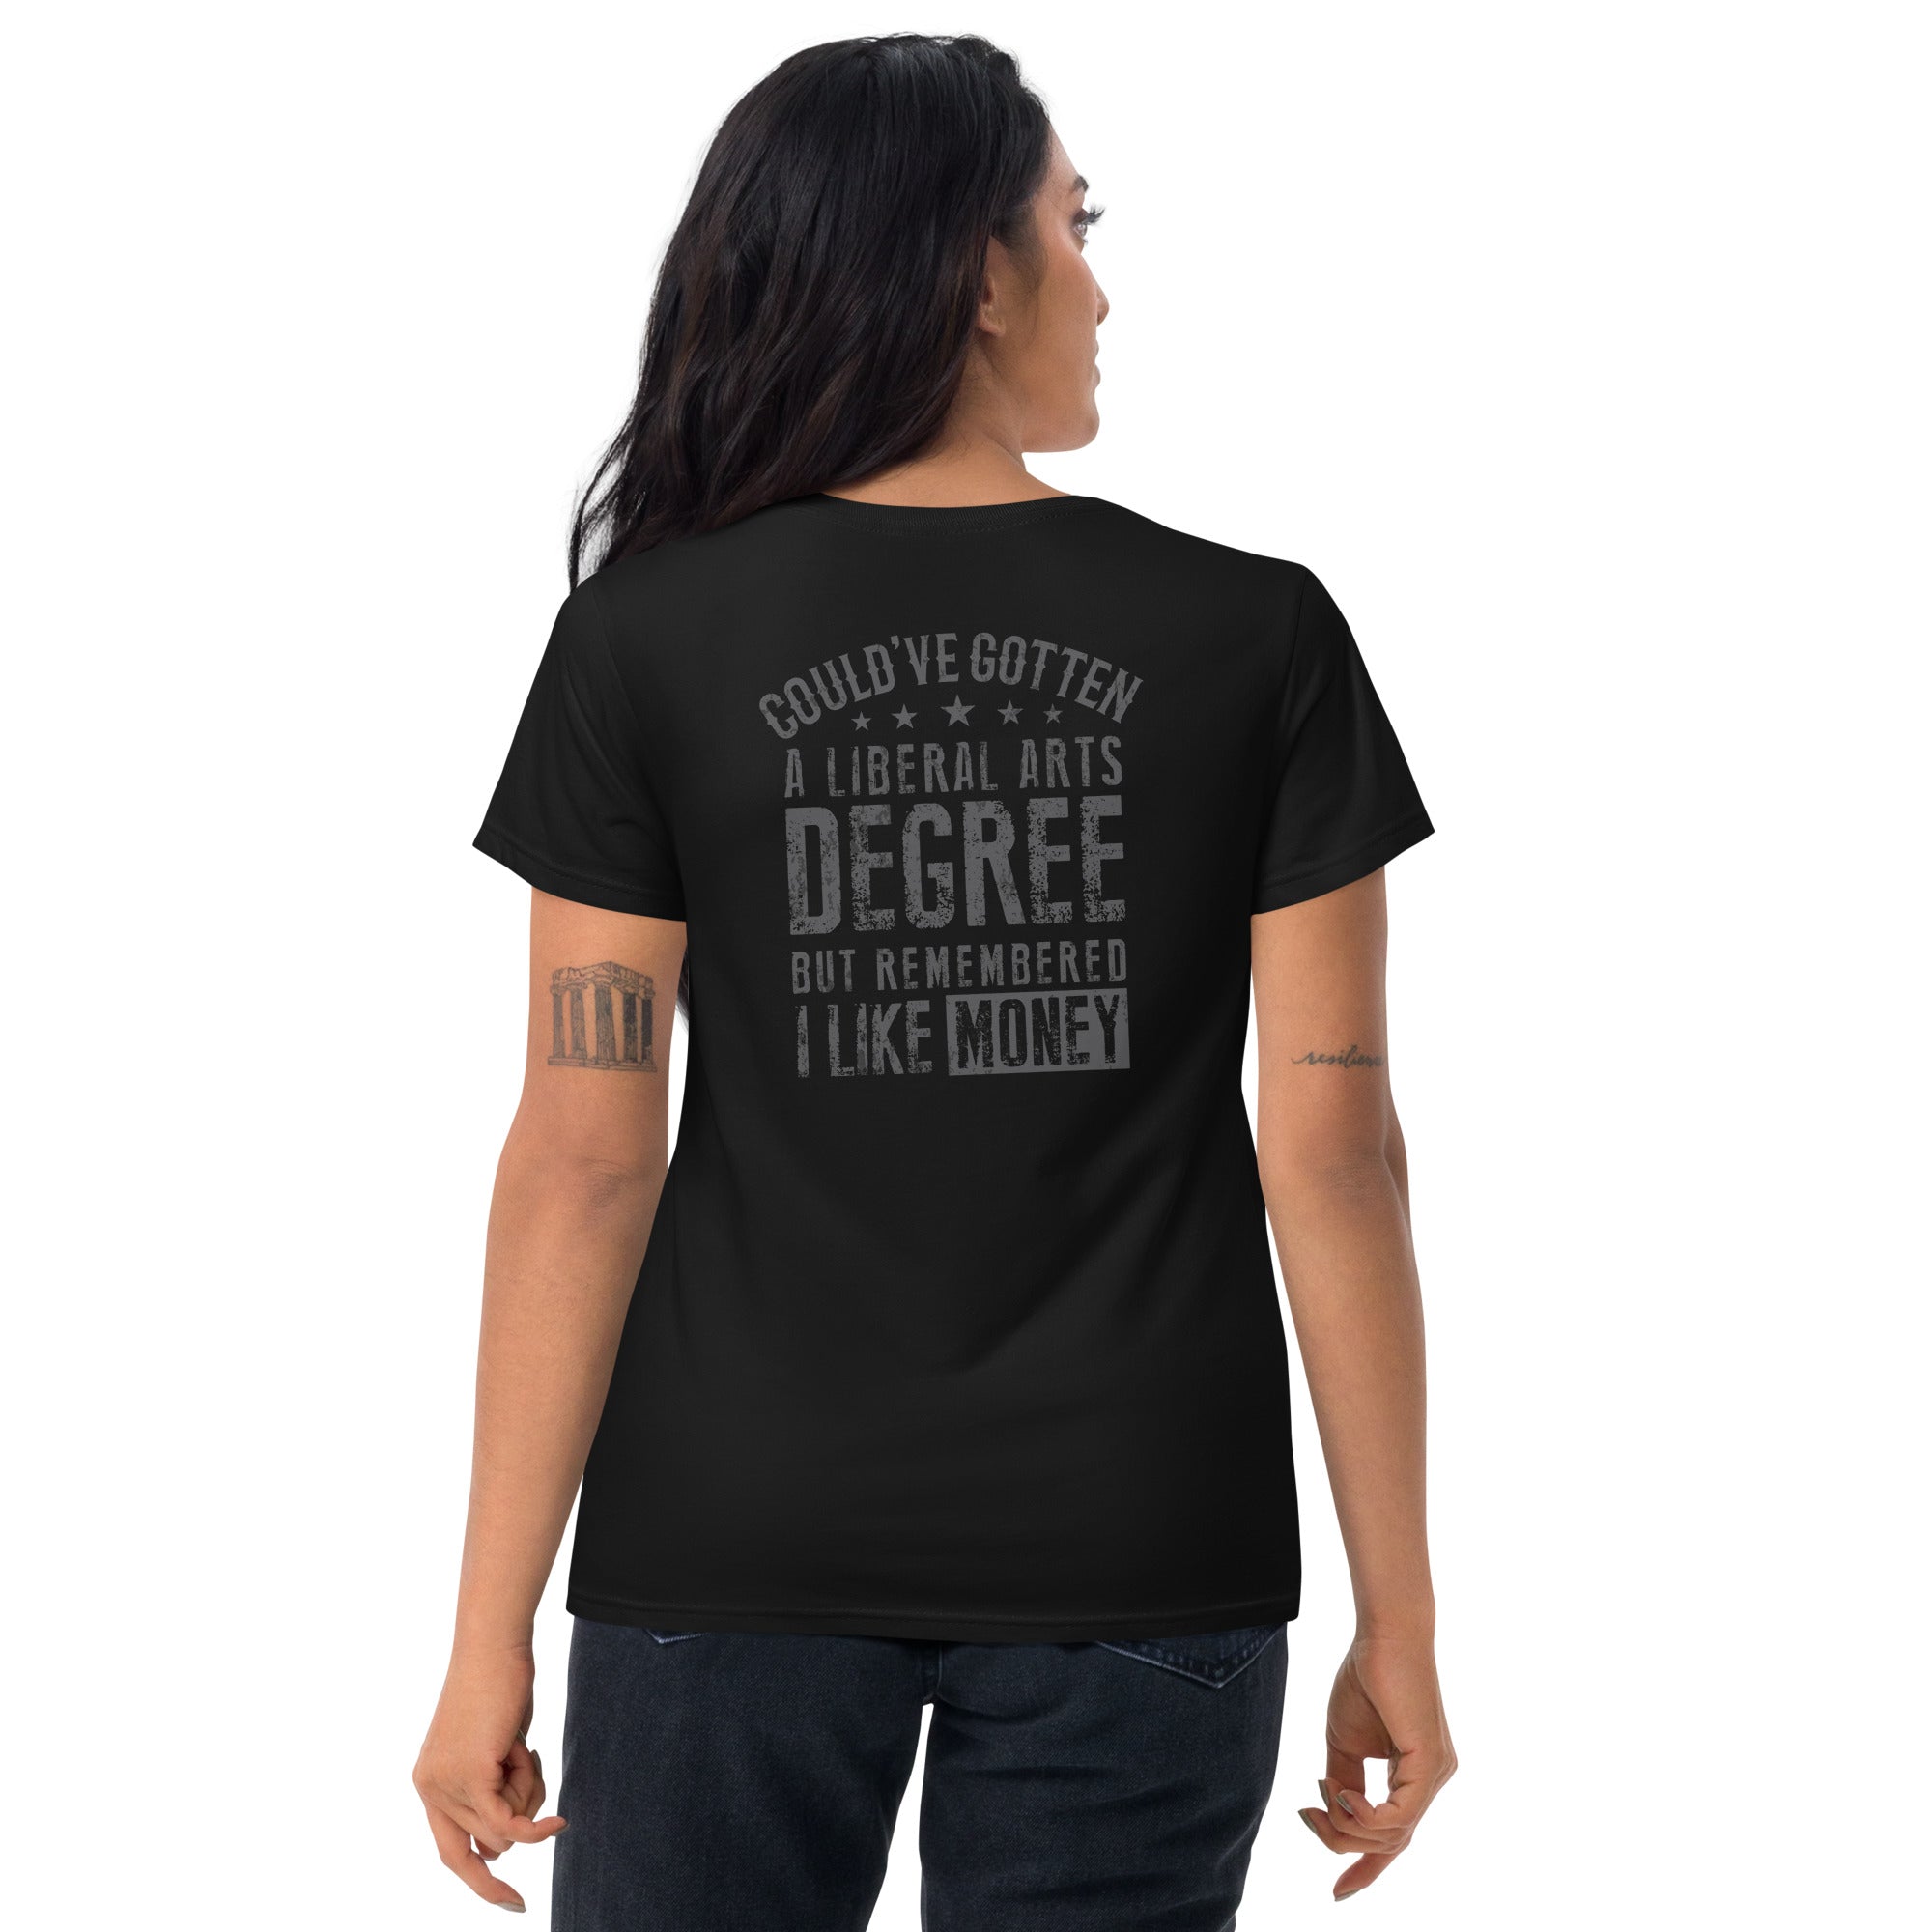 Could’ve gotten a Liberal Arts degree but remembered i like money  I  Women's short sleeve t-shirt